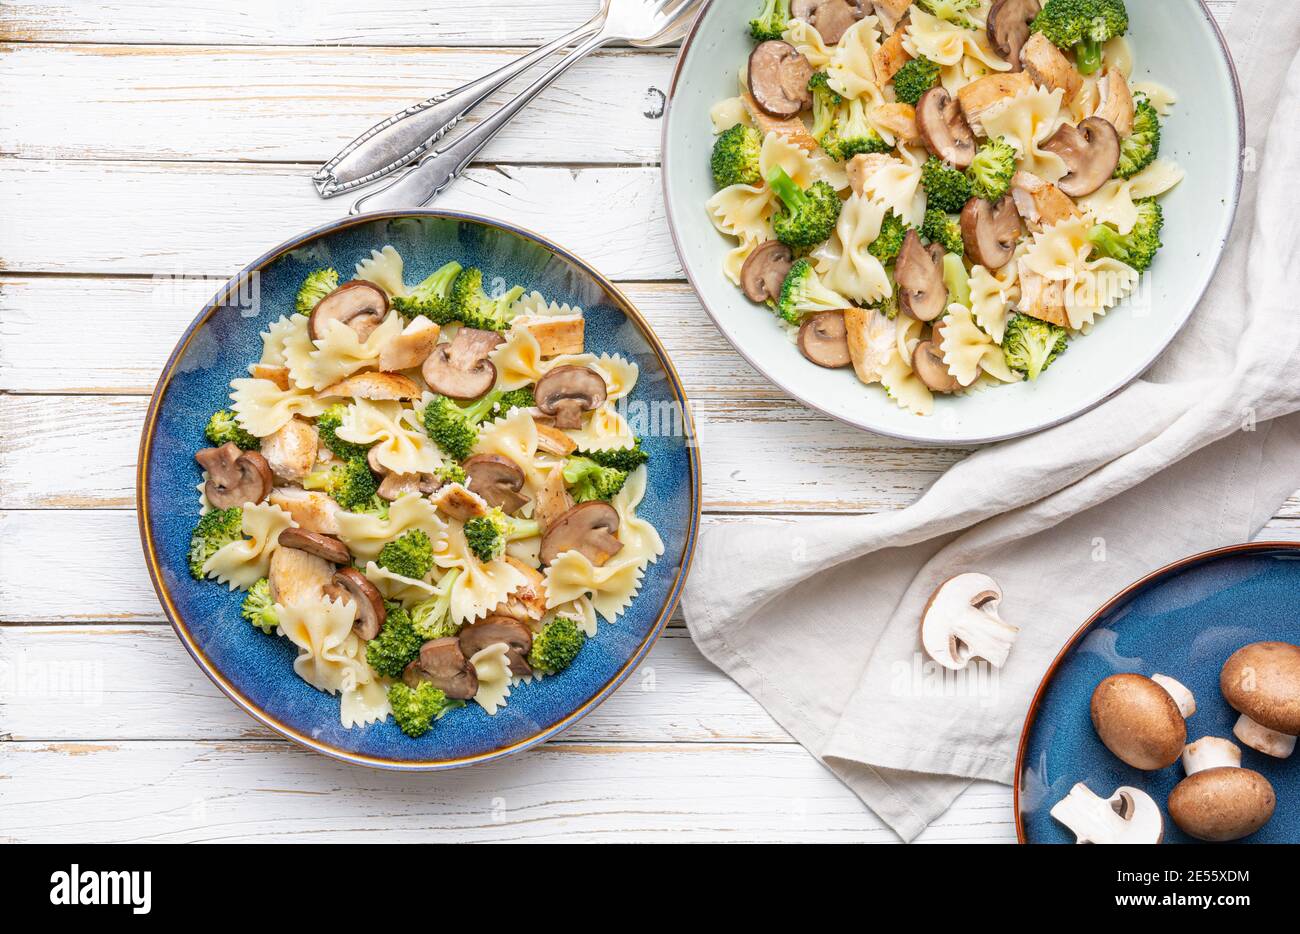 Mushroom pasta salad with steamed broccoli and baked chicken meat slices for lunch Stock Photo